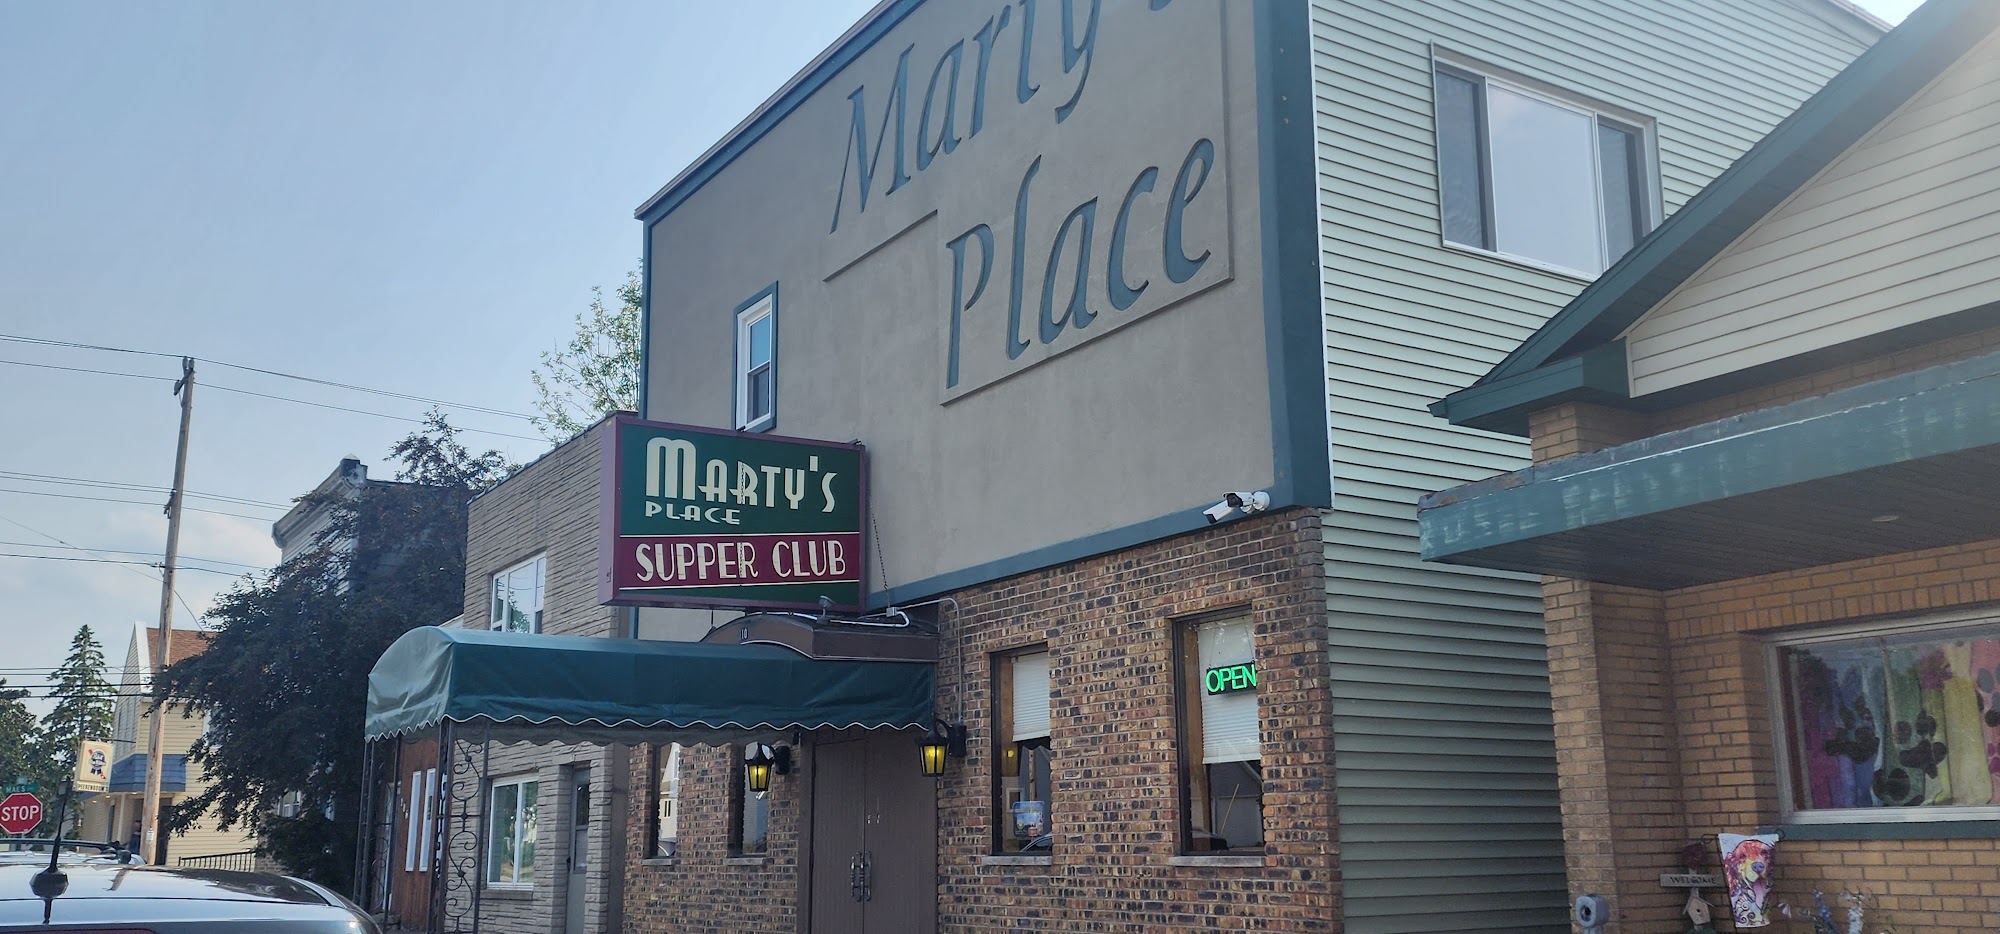 Marty's Place